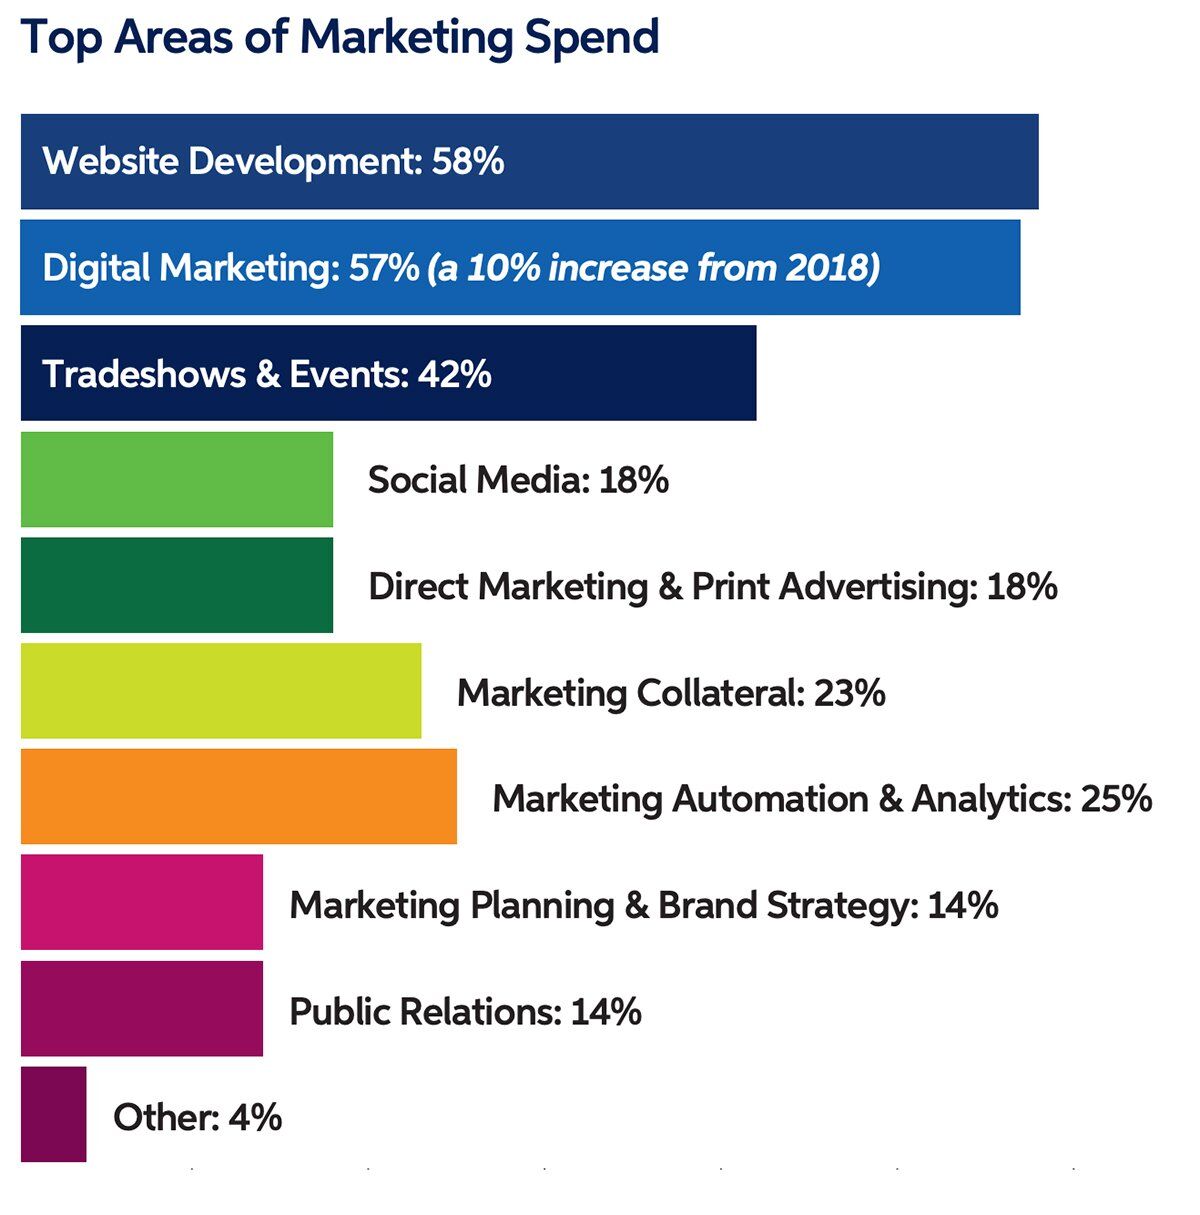 Top Areas of Marketing Spend